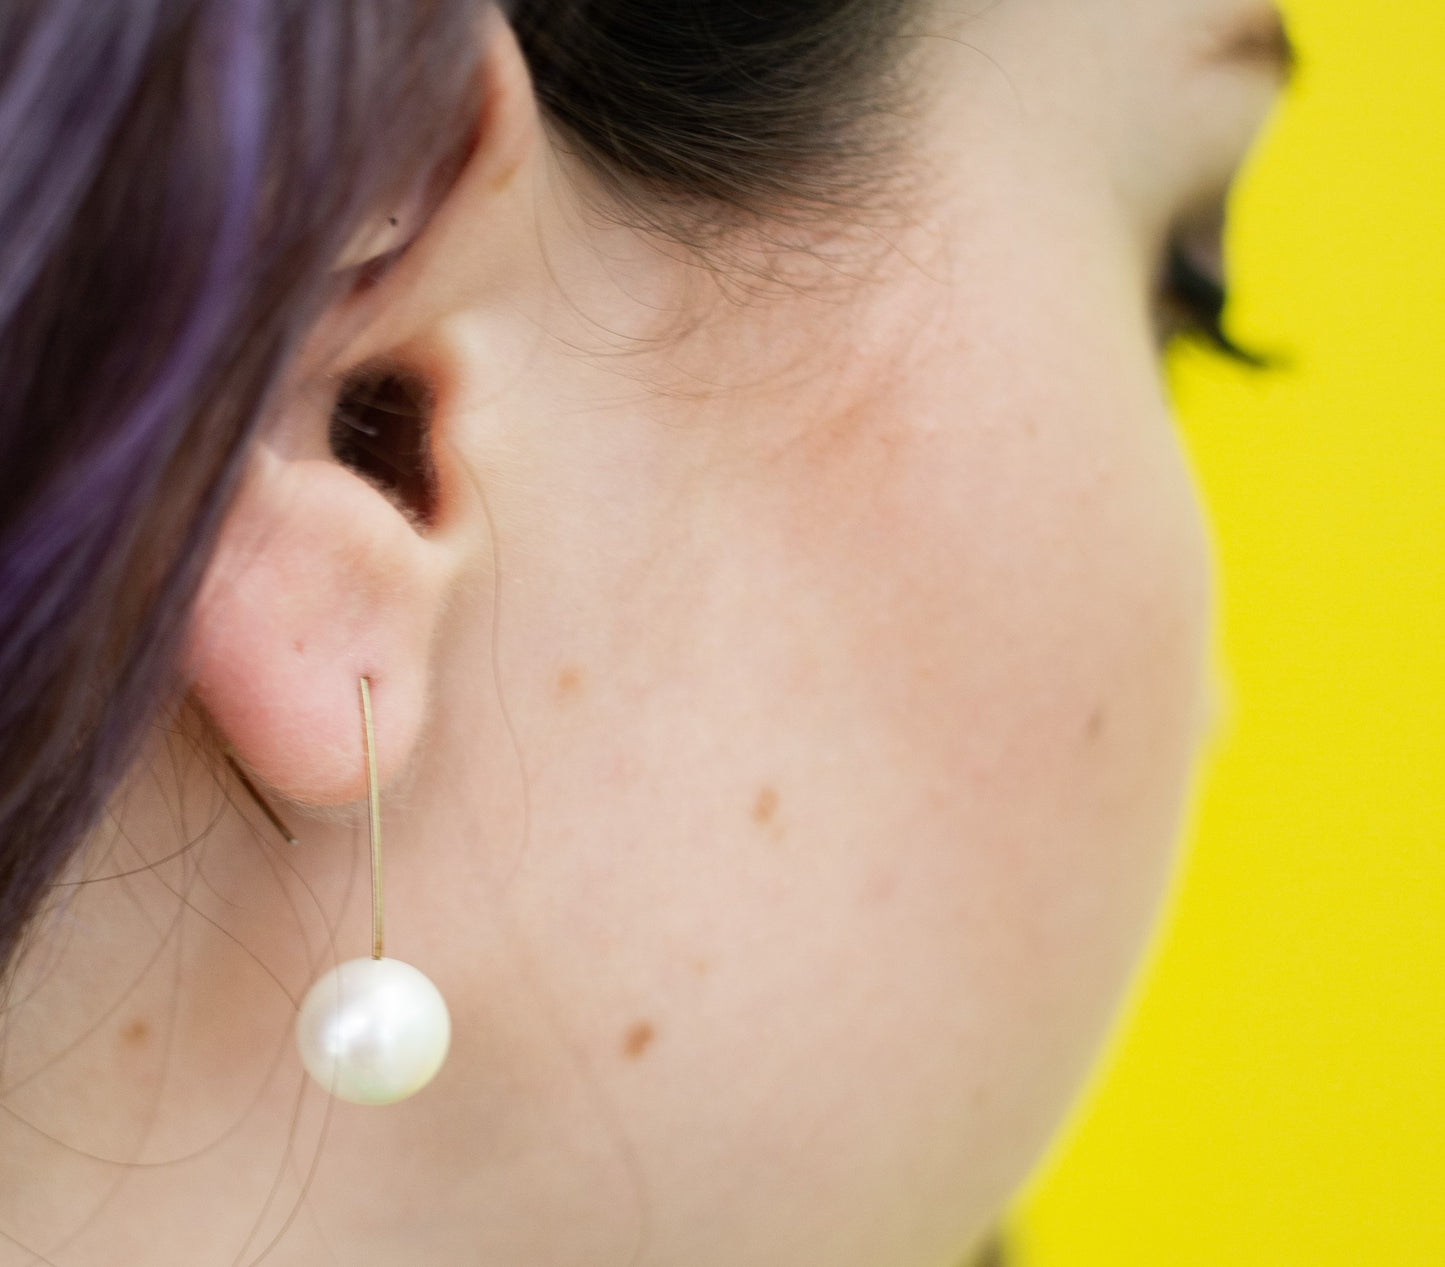 Straight Drop Earrings with White Pearls